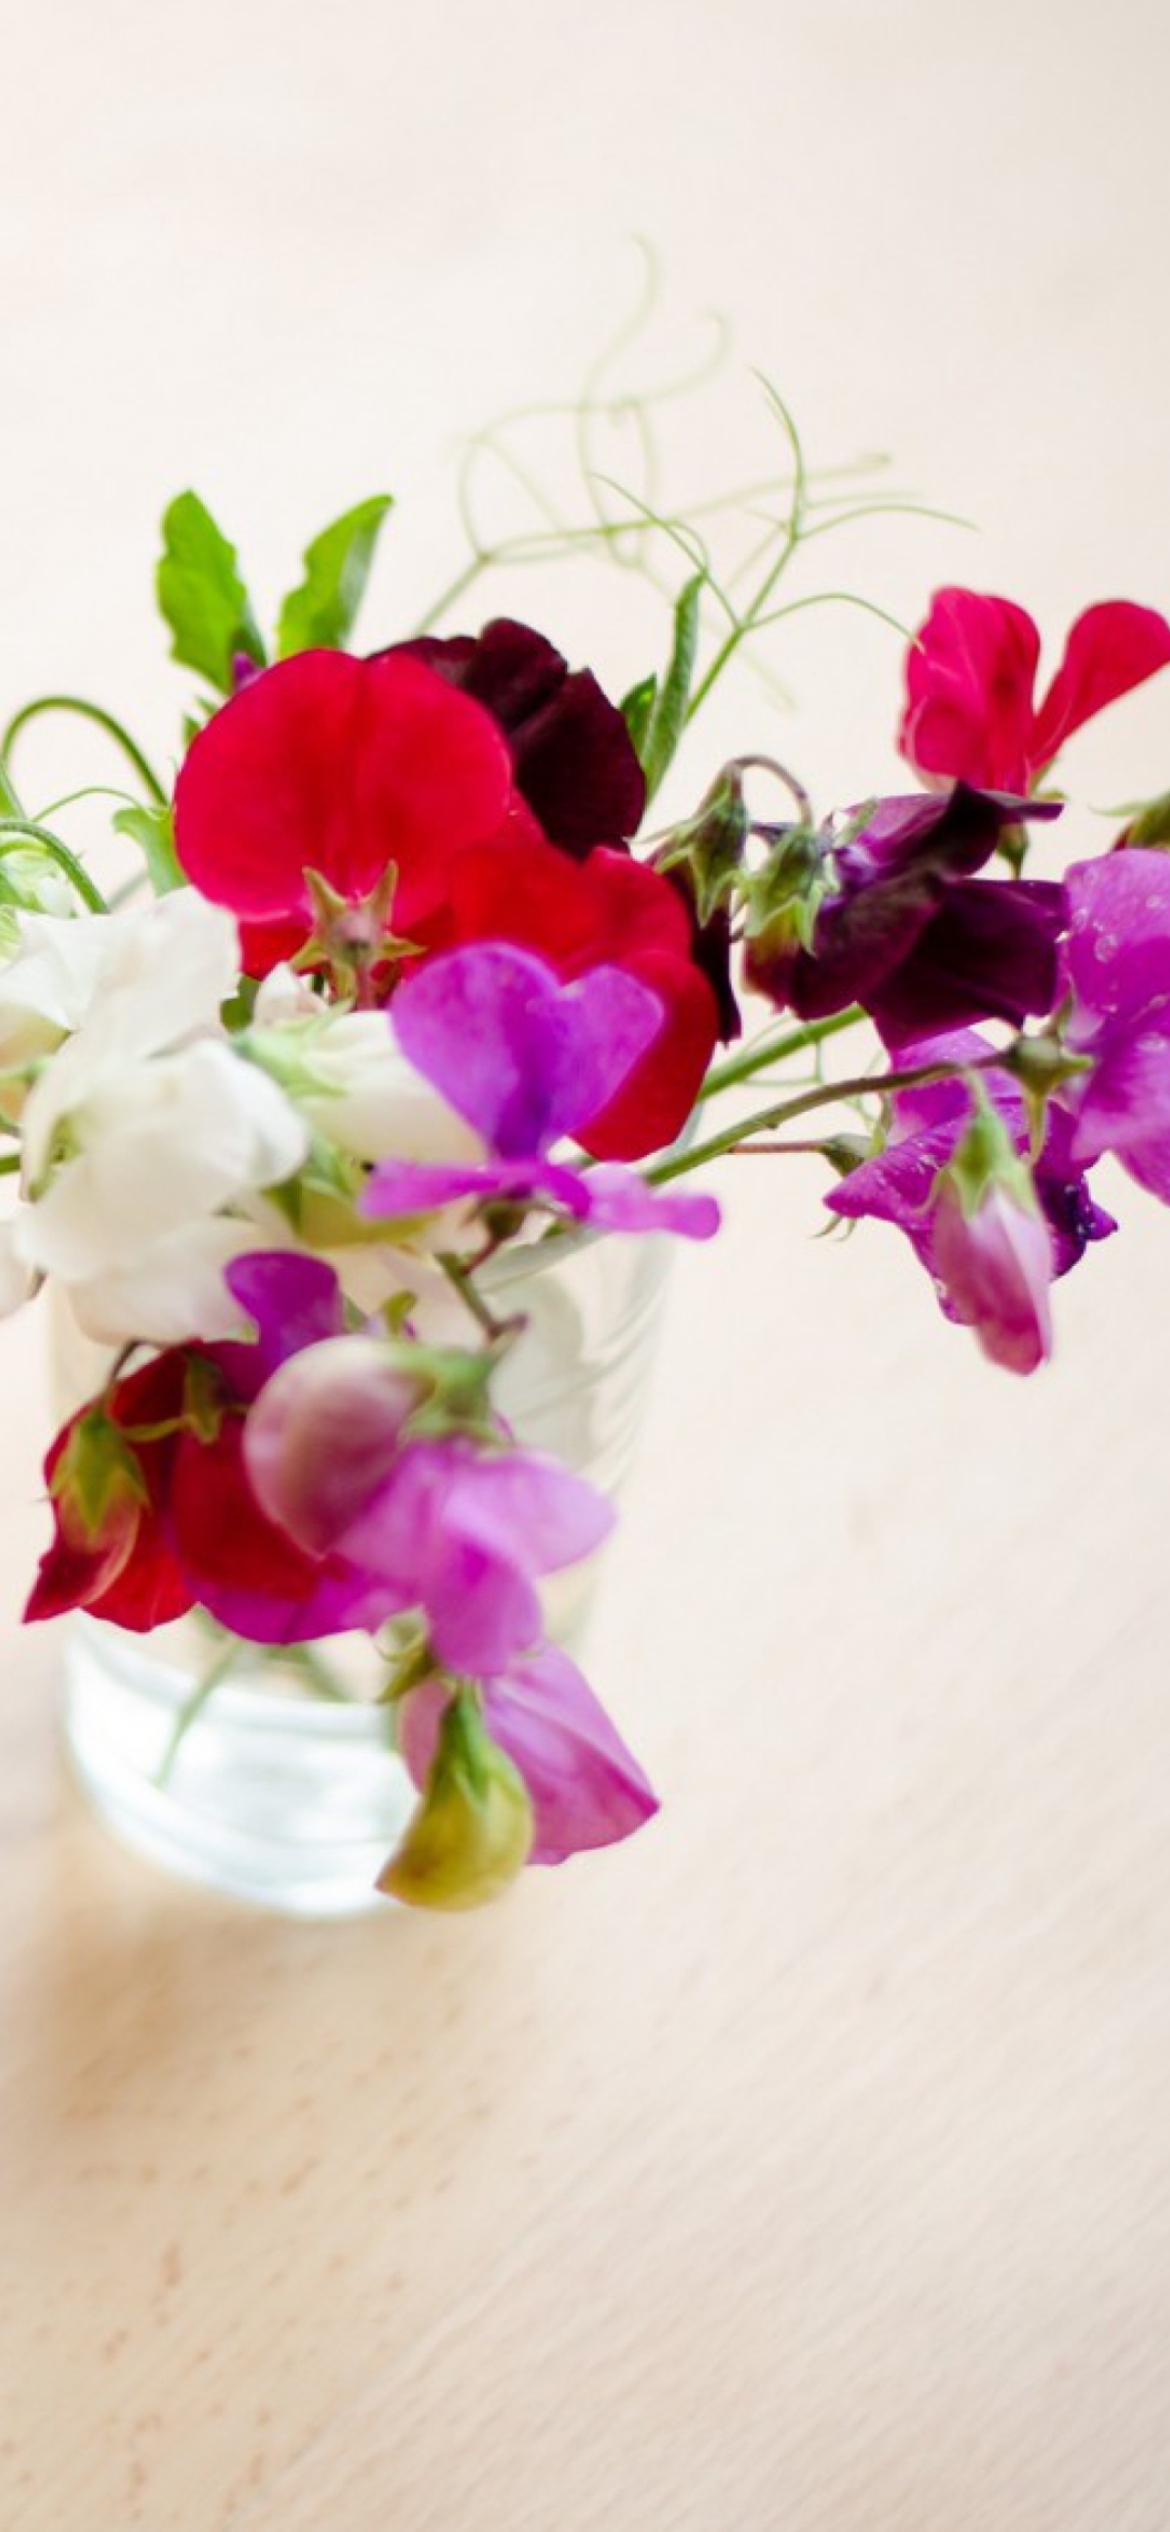 Bright Flowers On Table wallpaper 1170x2532